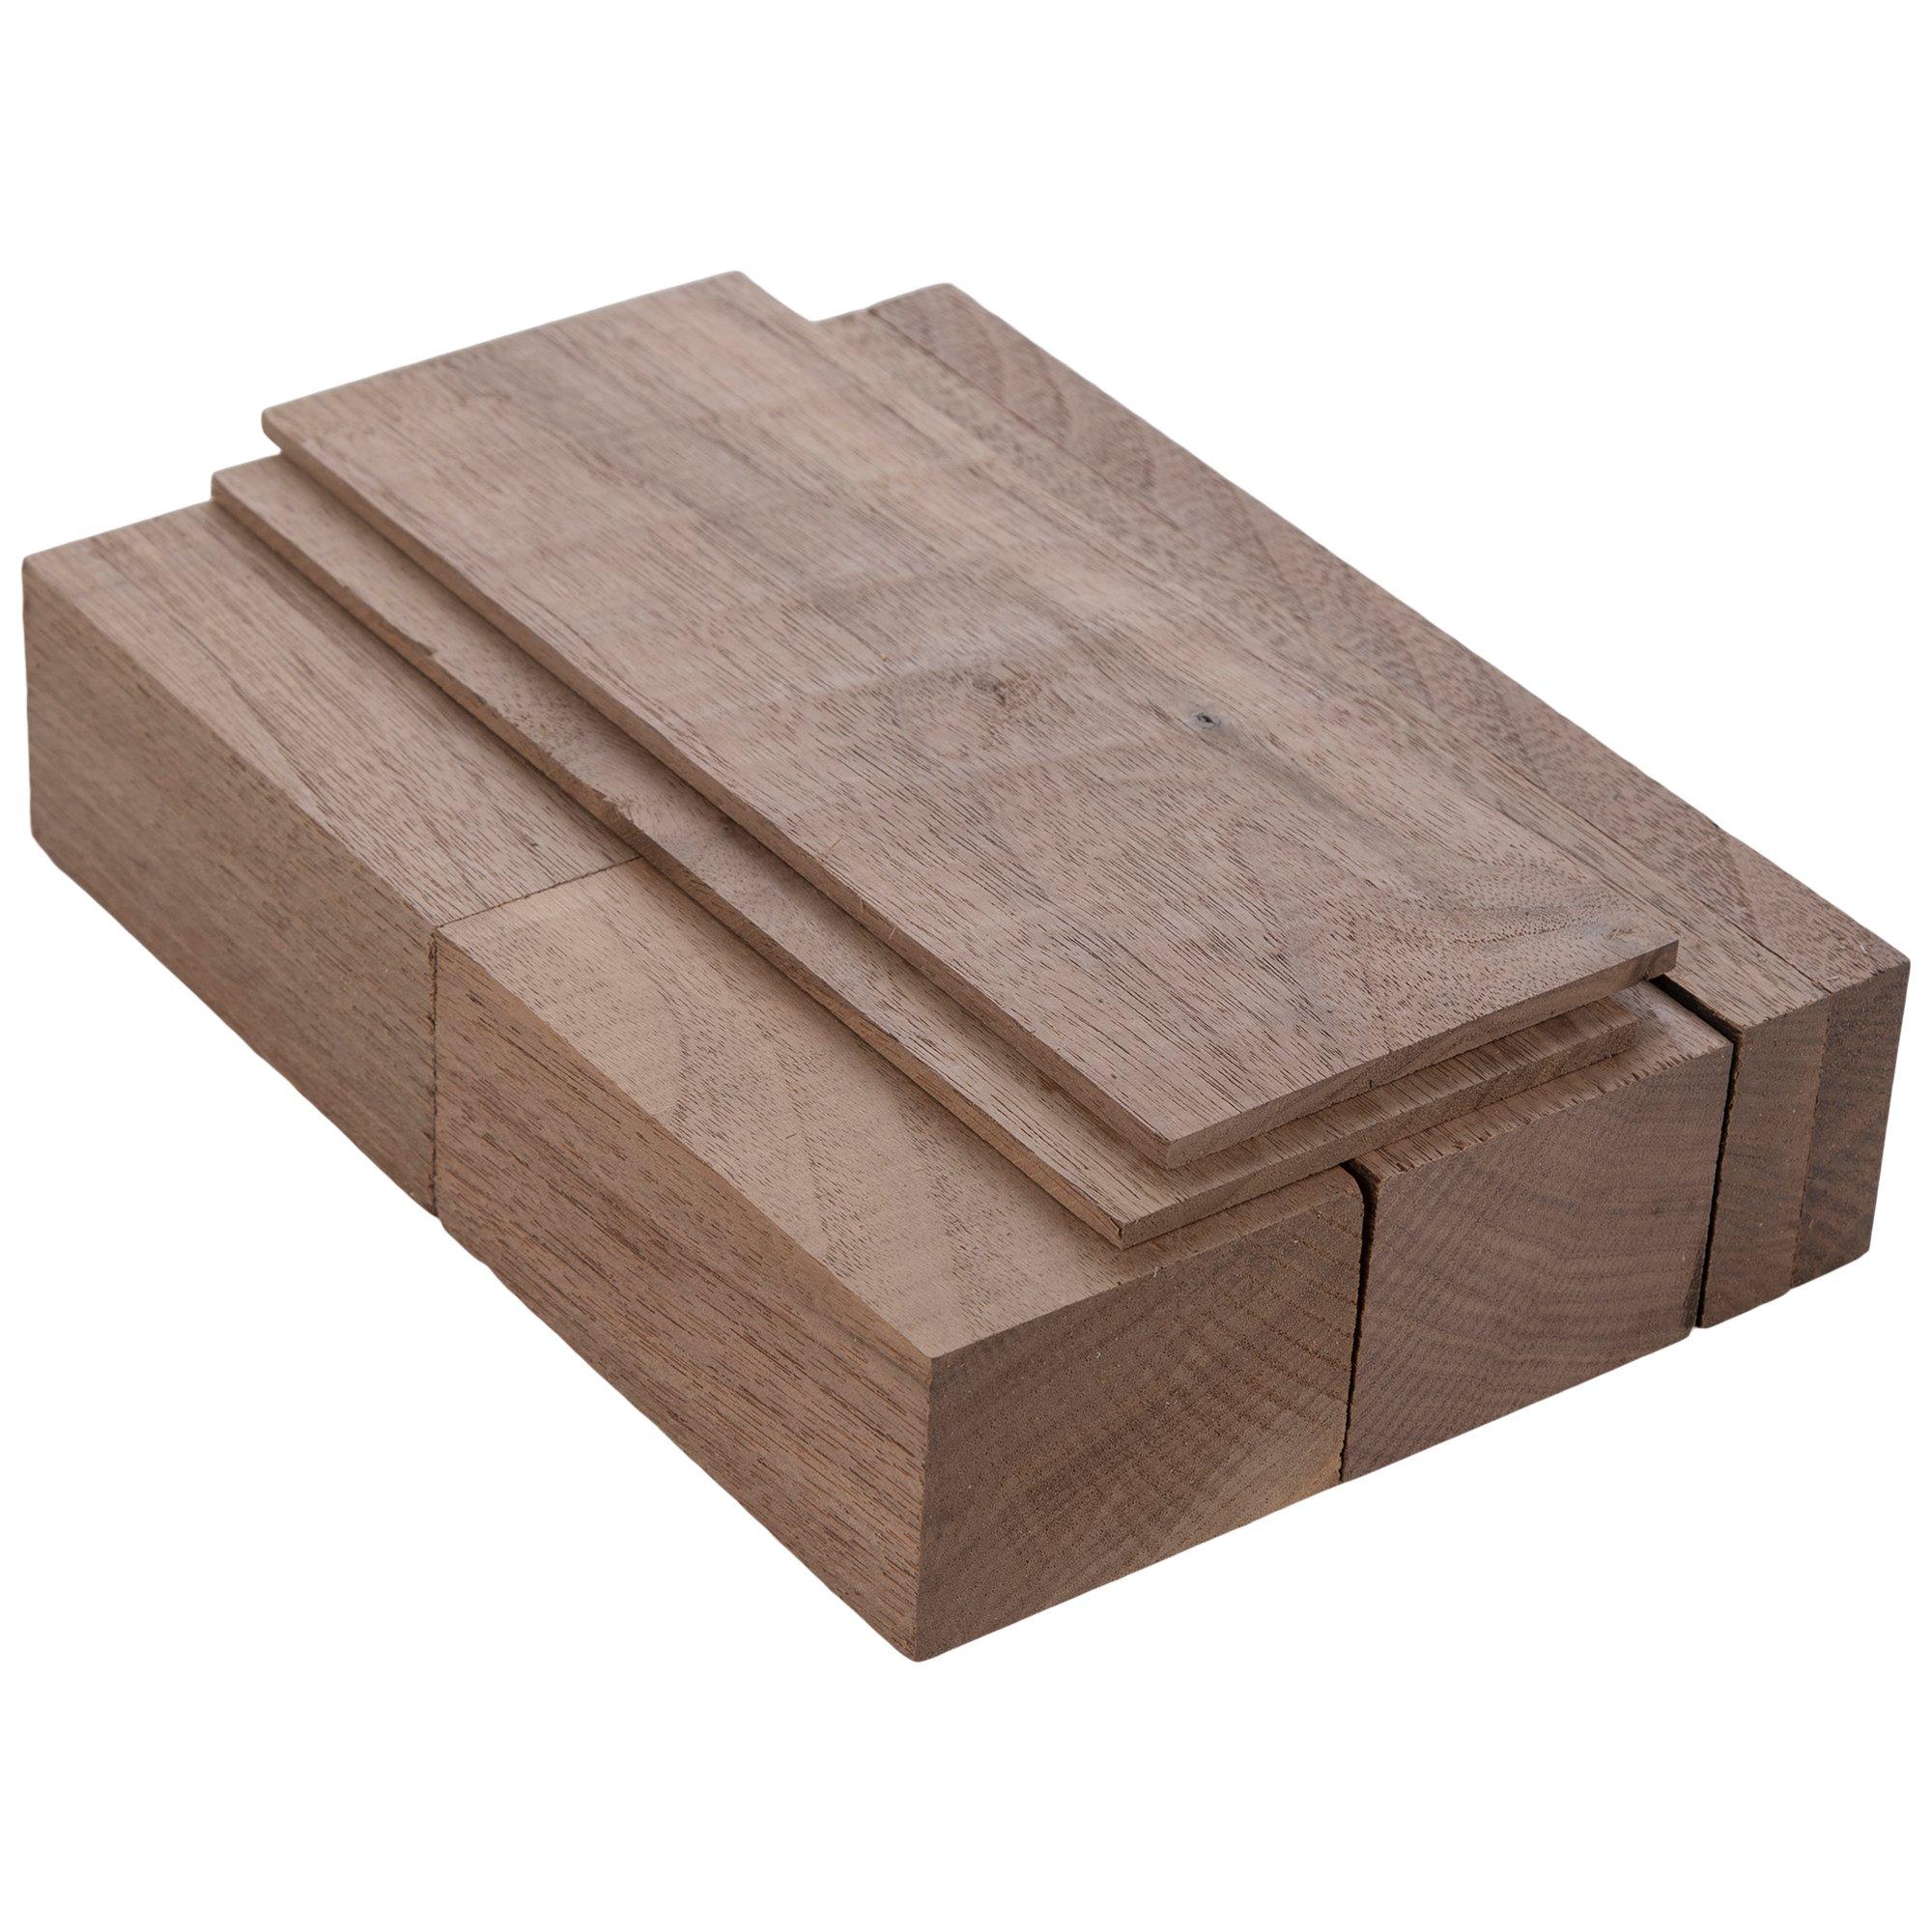 Midwest Products Mini Carving Block Bags